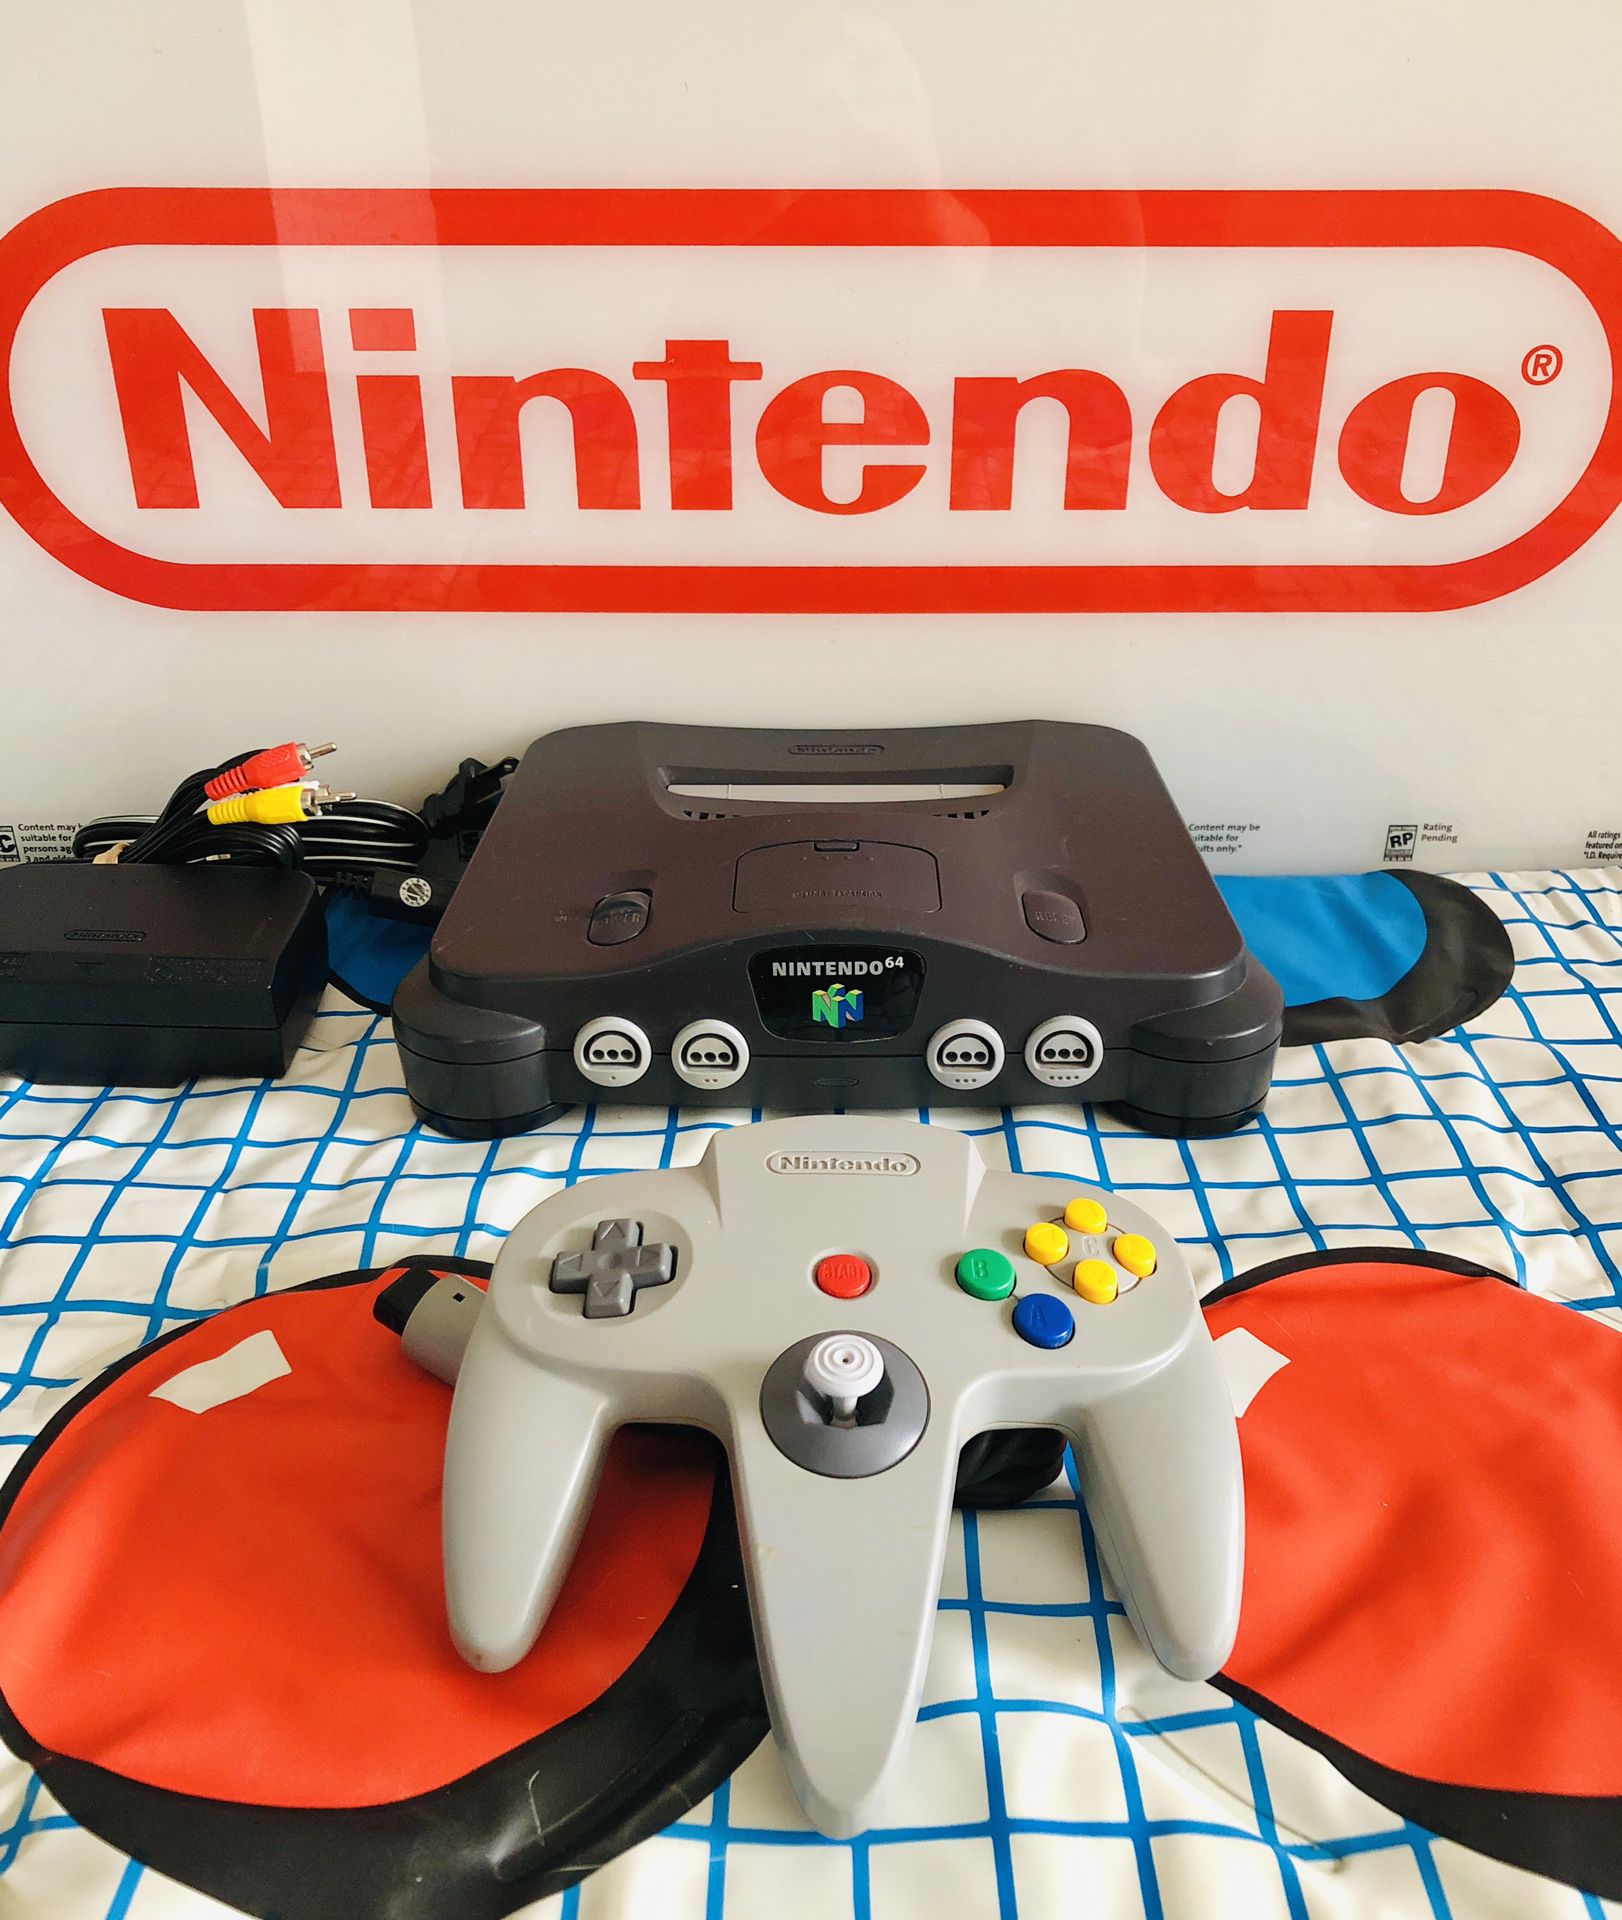 Nintendo N64 System & Games For sale (super Mario, 007 & More